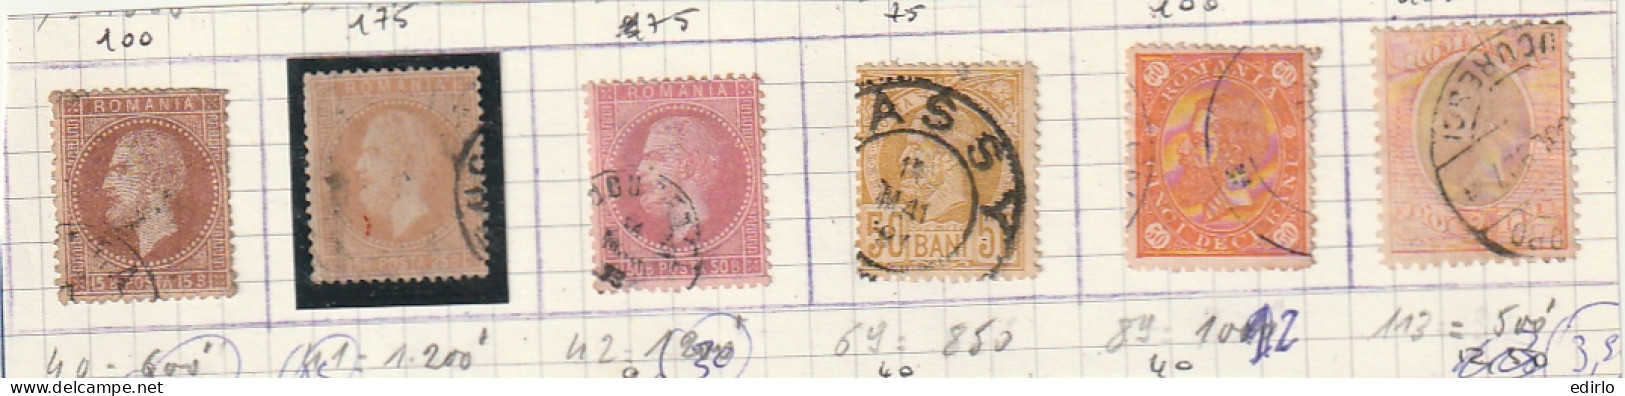 ///   ROUMANIE  ///   Petit Lot Premiers Timbres Moldavie / Roumanie   - Used Stamps